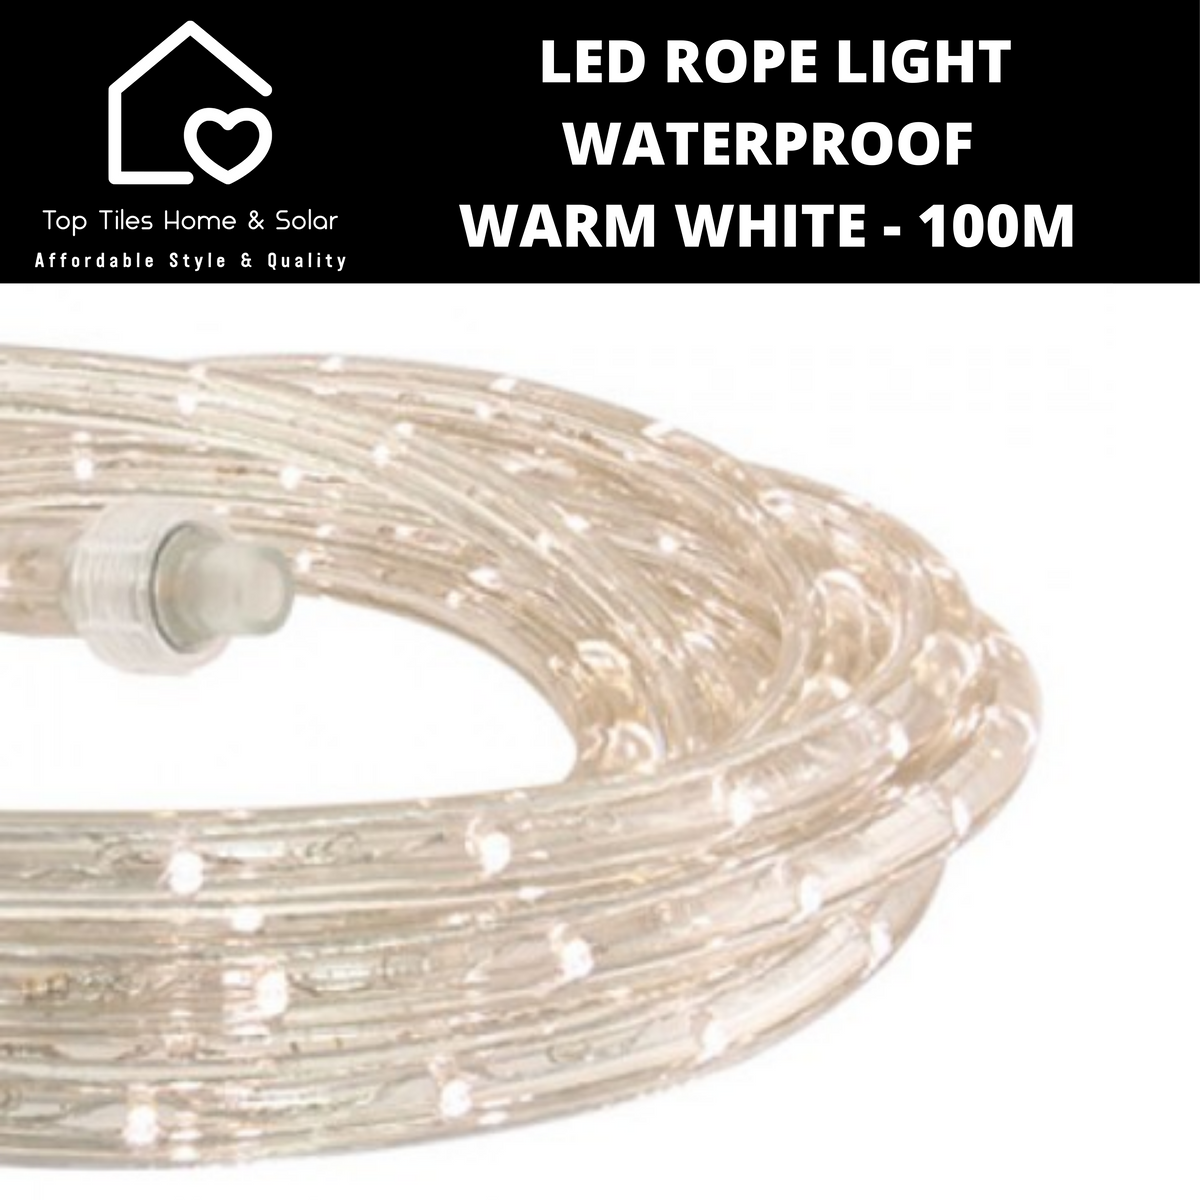 LED Rope Light Waterproof Cool White - 100m – Top Tiles Home & Solar